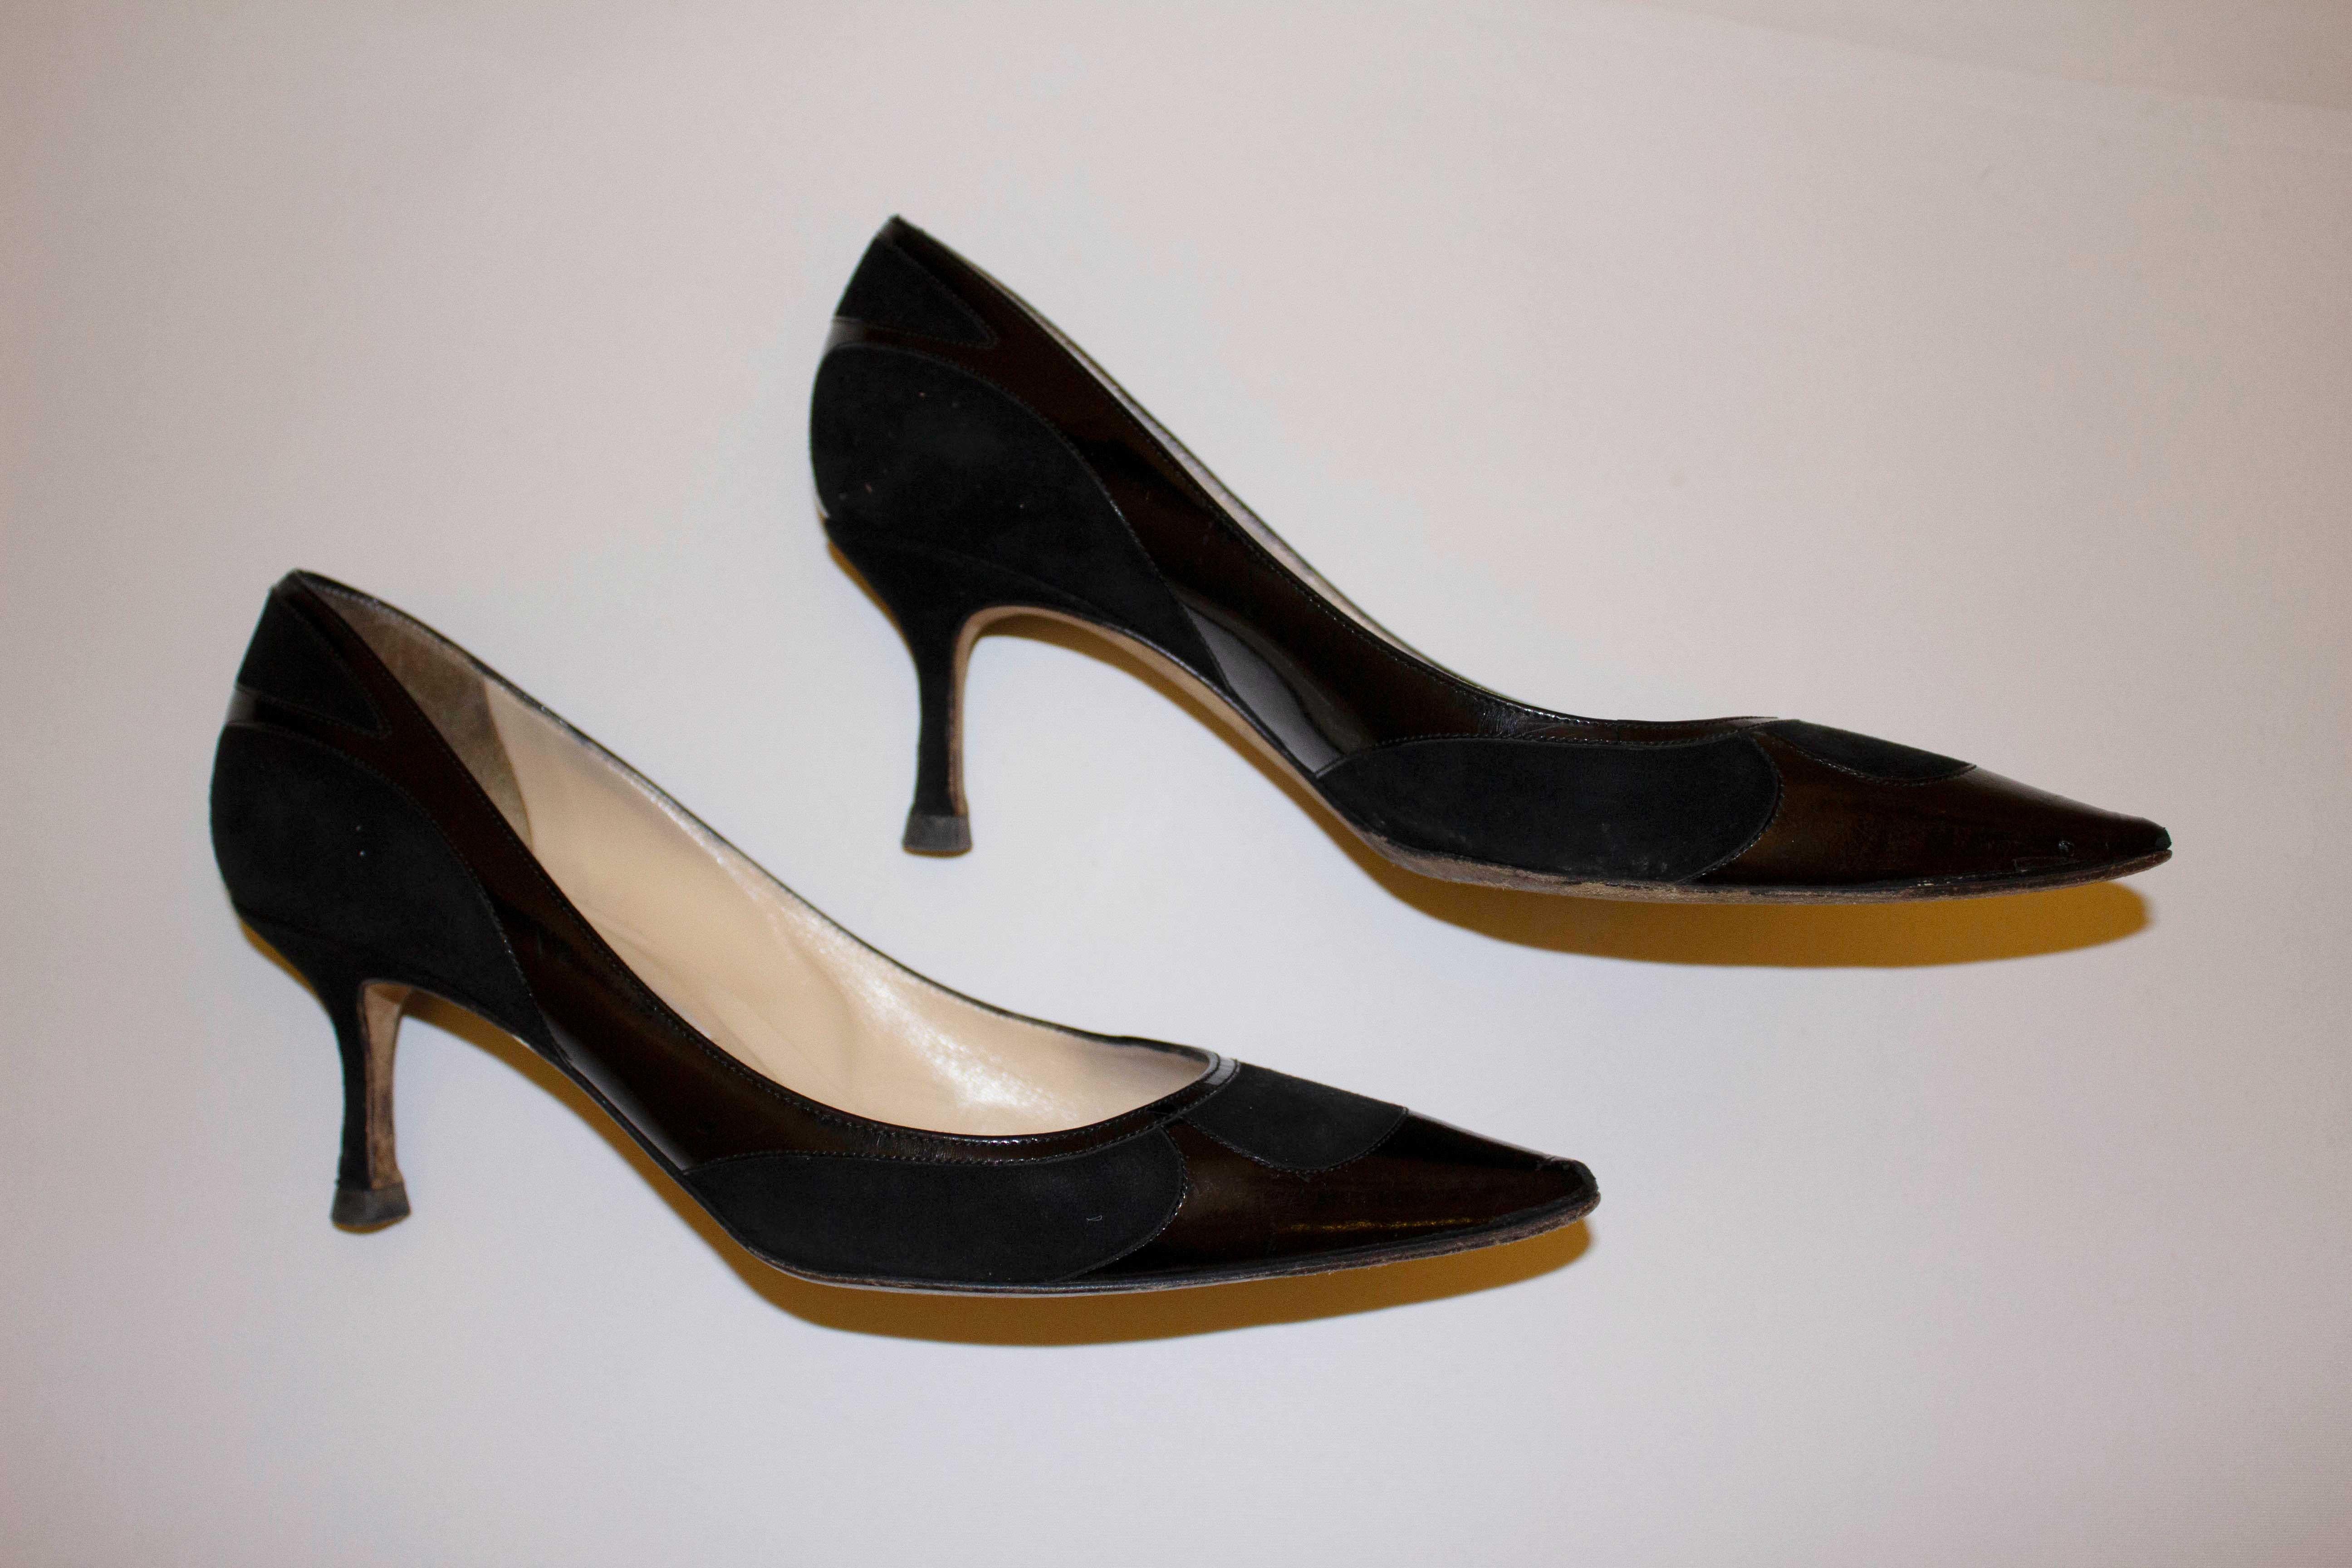 A chic pair of heels by Jimmy Choo.  In patent black leather and black suede, the heel height is
2 1/2 '' inches and size 39 1/2.